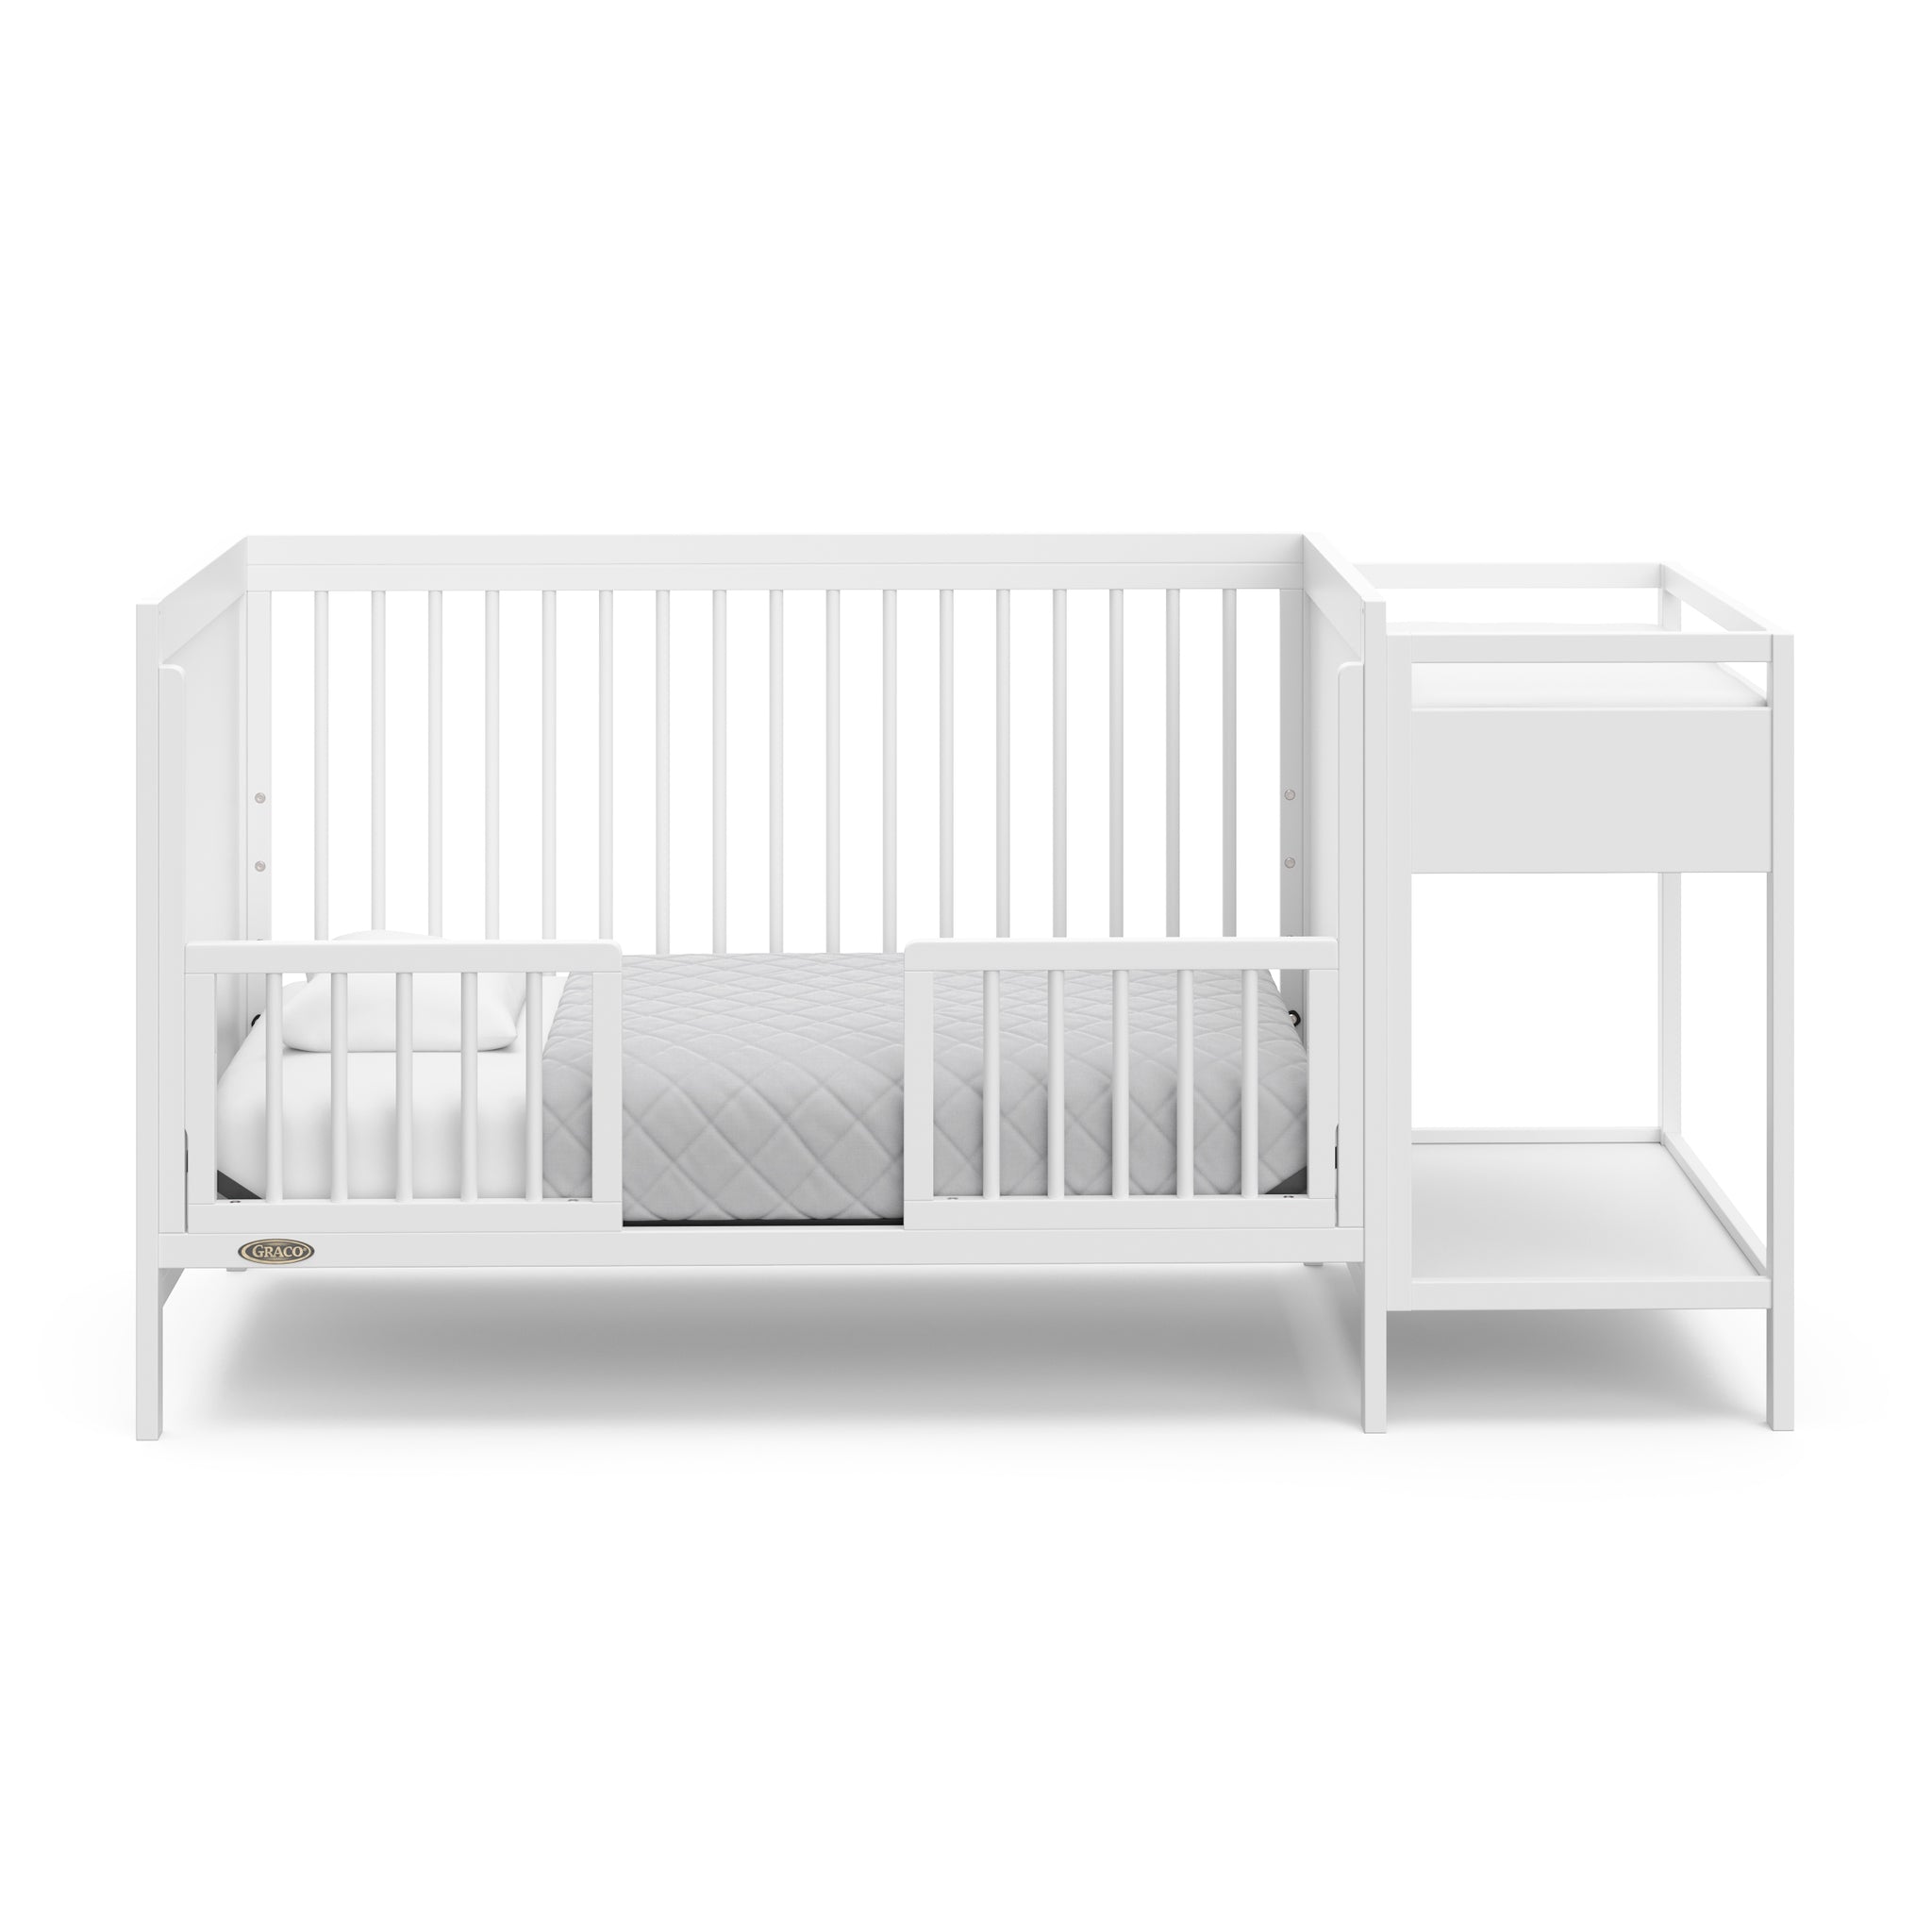 White crib in toddler bed conversion with two safety guardrails